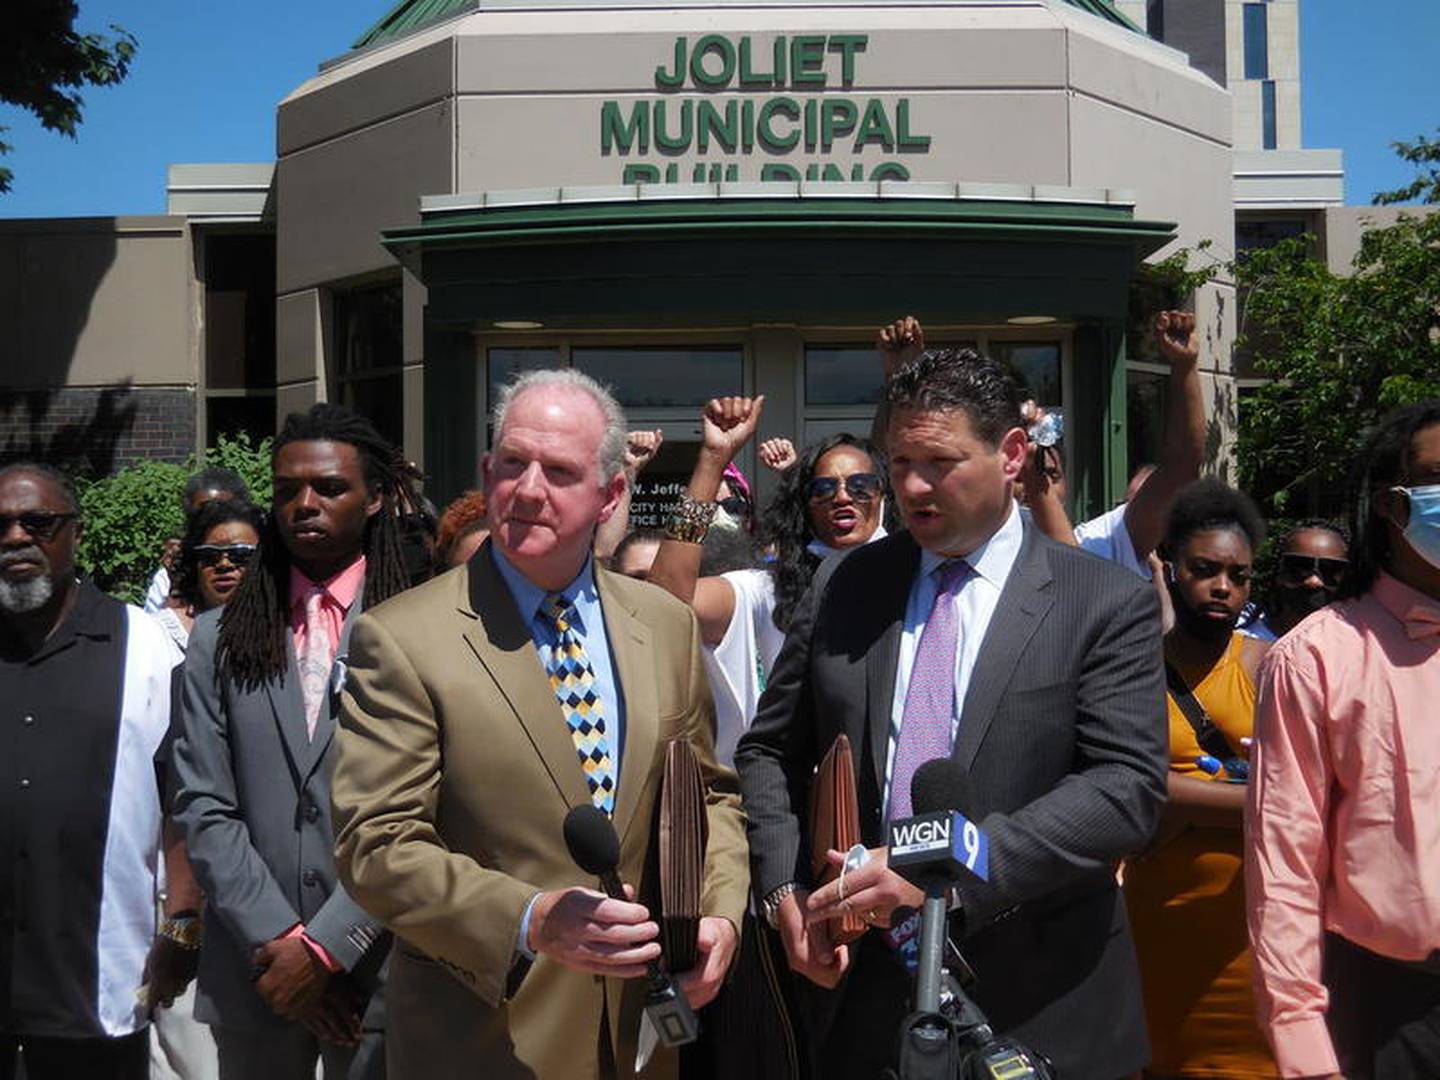 Attorneys Lawrence X. O'Reilly (left) and Michael E. Baker stand in the foreground at a press conference outside Joliet City Hall Monday.